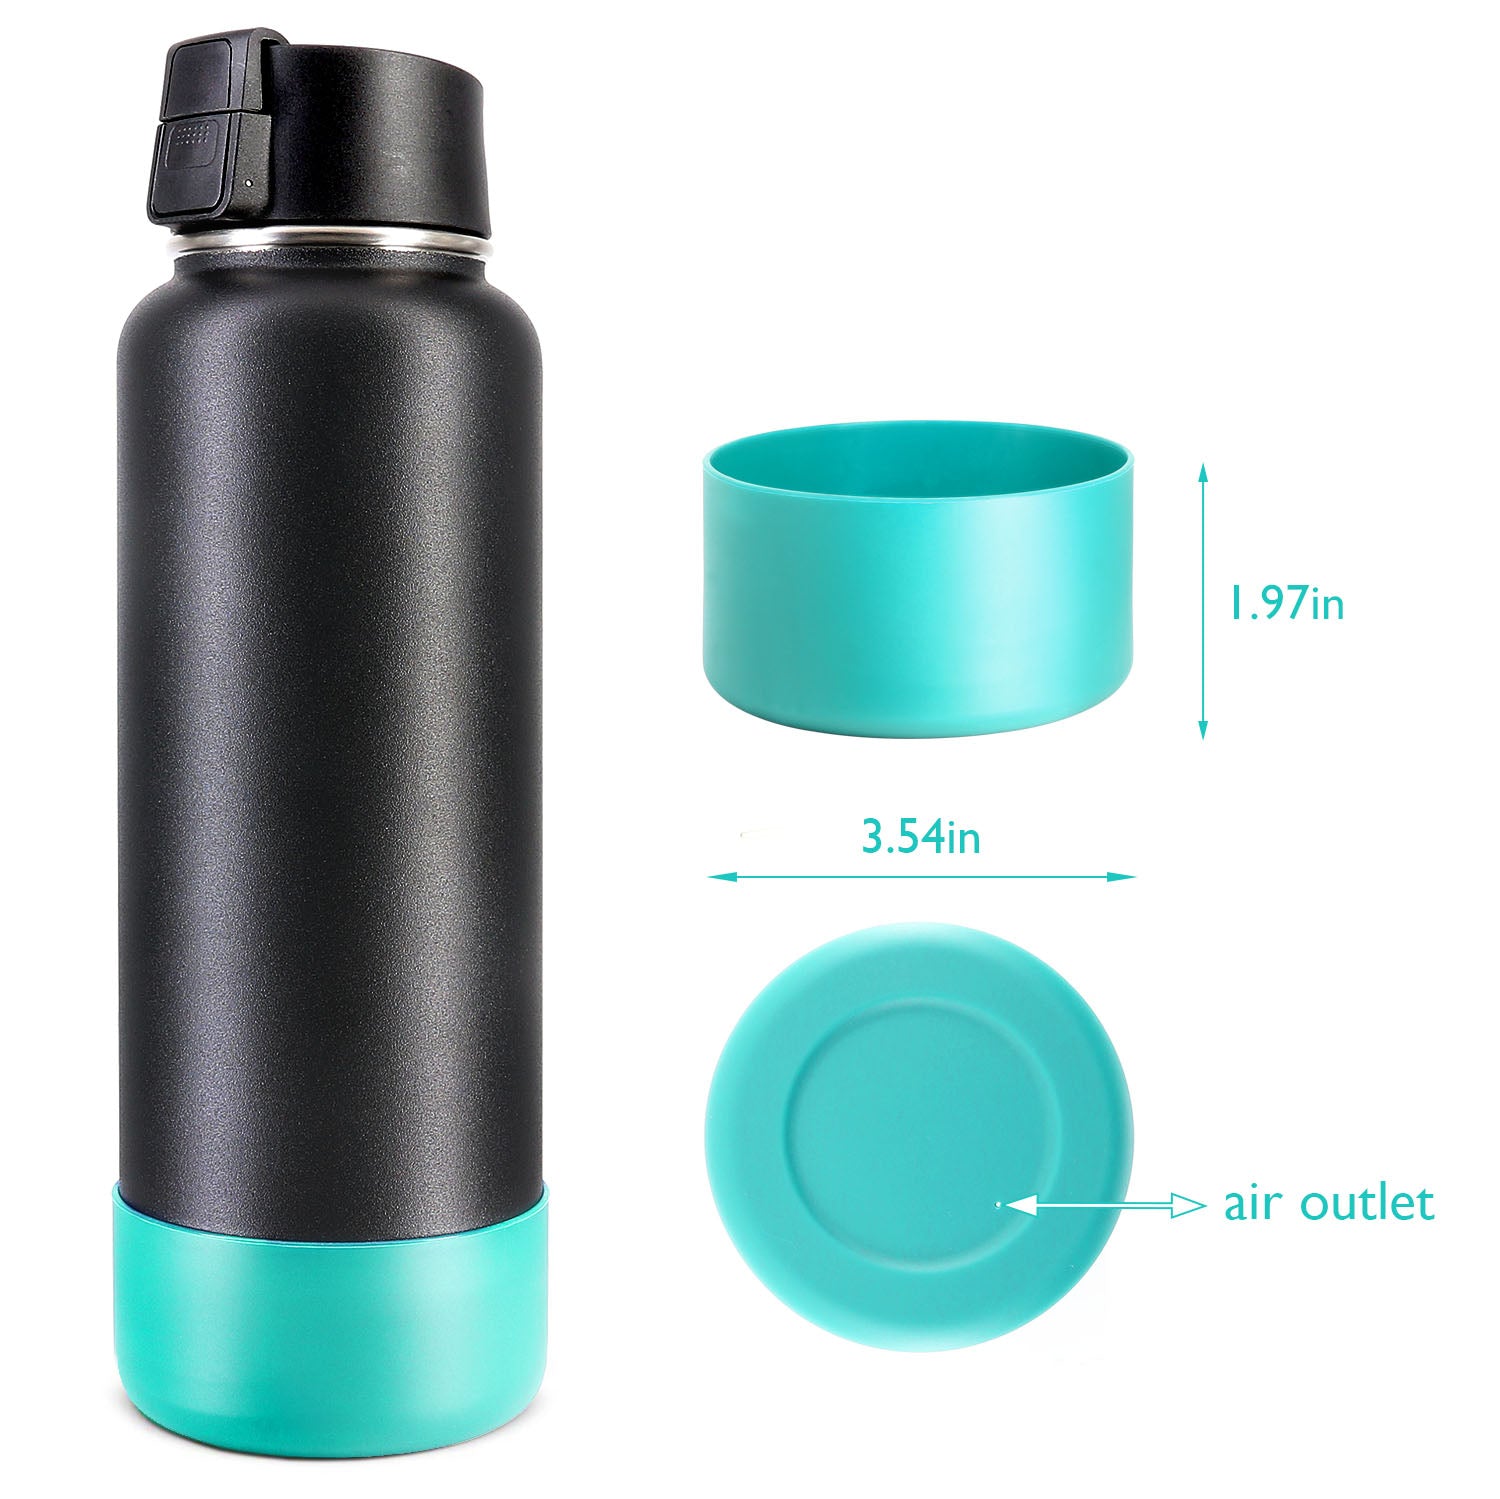 Protective Silicone Bottle Boot/Sleeve for Bottles, BPA Free Anti-Slip Bottom Cover Cap for Stainless Steel Water Bottle, Dishwasher Safe